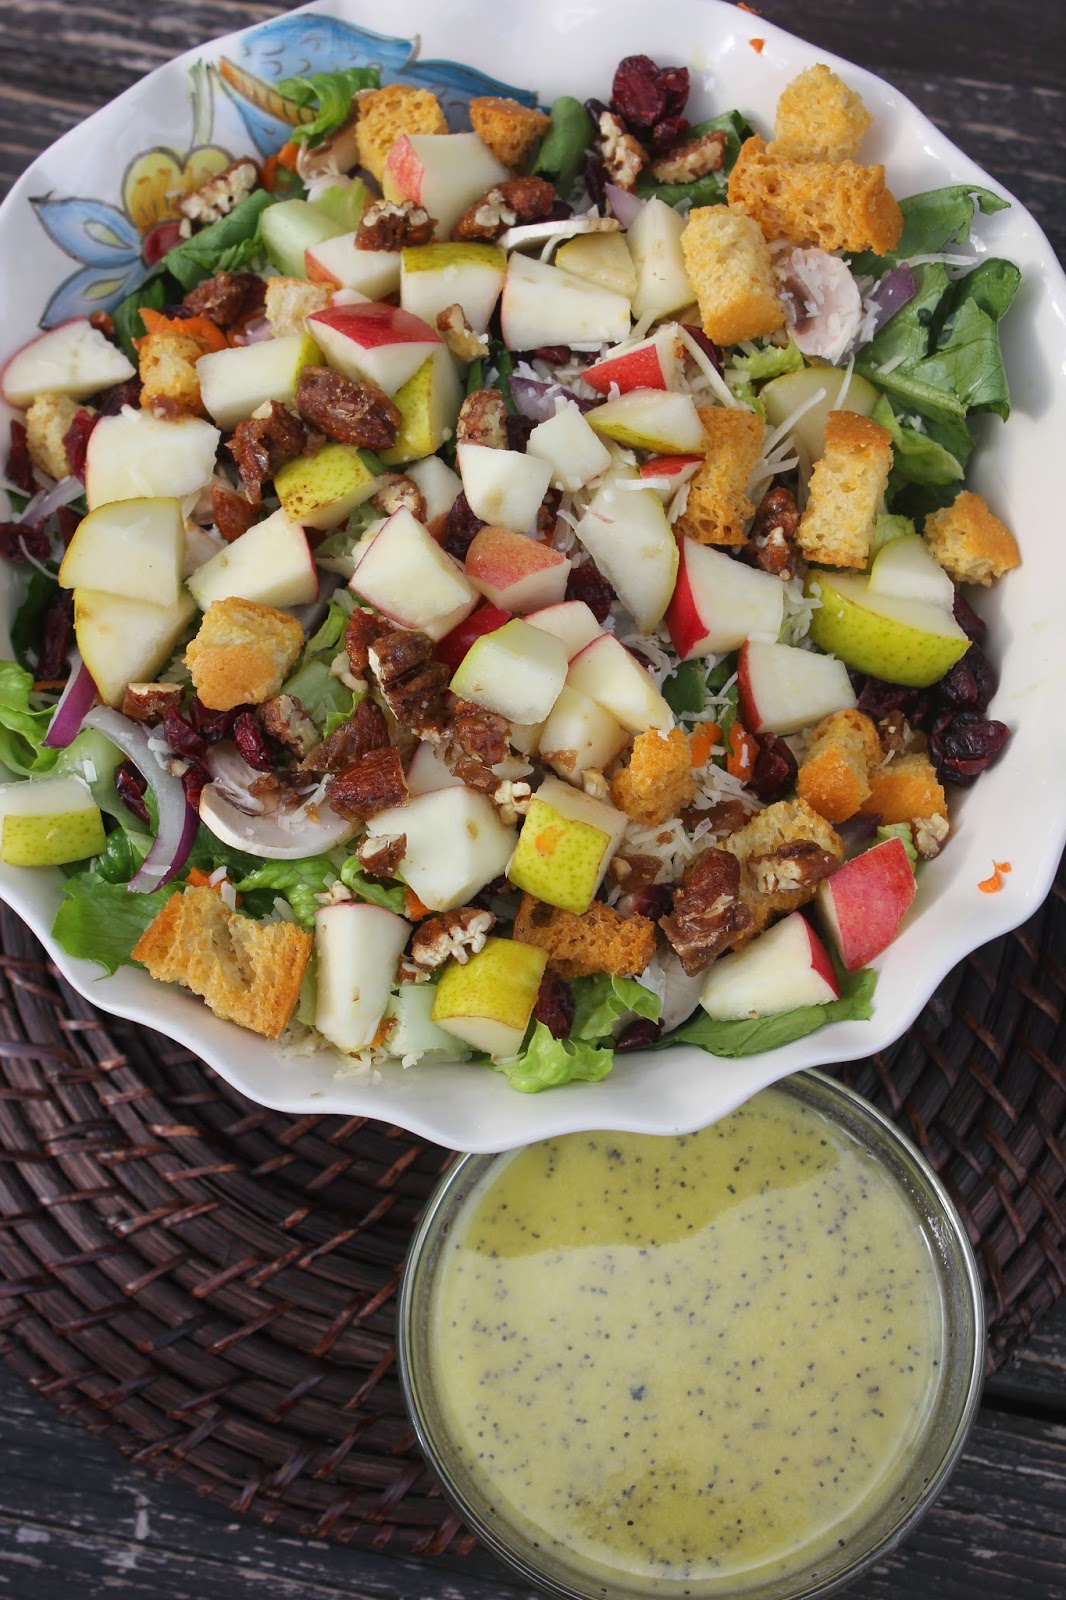 Dynamic Deals, Deal of the Day, Deals to Meals Updates, Shopping Deals, Recipe: Salad, Recipe: Side Dishes, Recipe: Main Dish, Recipe: Fruit, Recipe: Vegetables, Cranberry Apple Pear Salad with Sweet Lemon Dressing